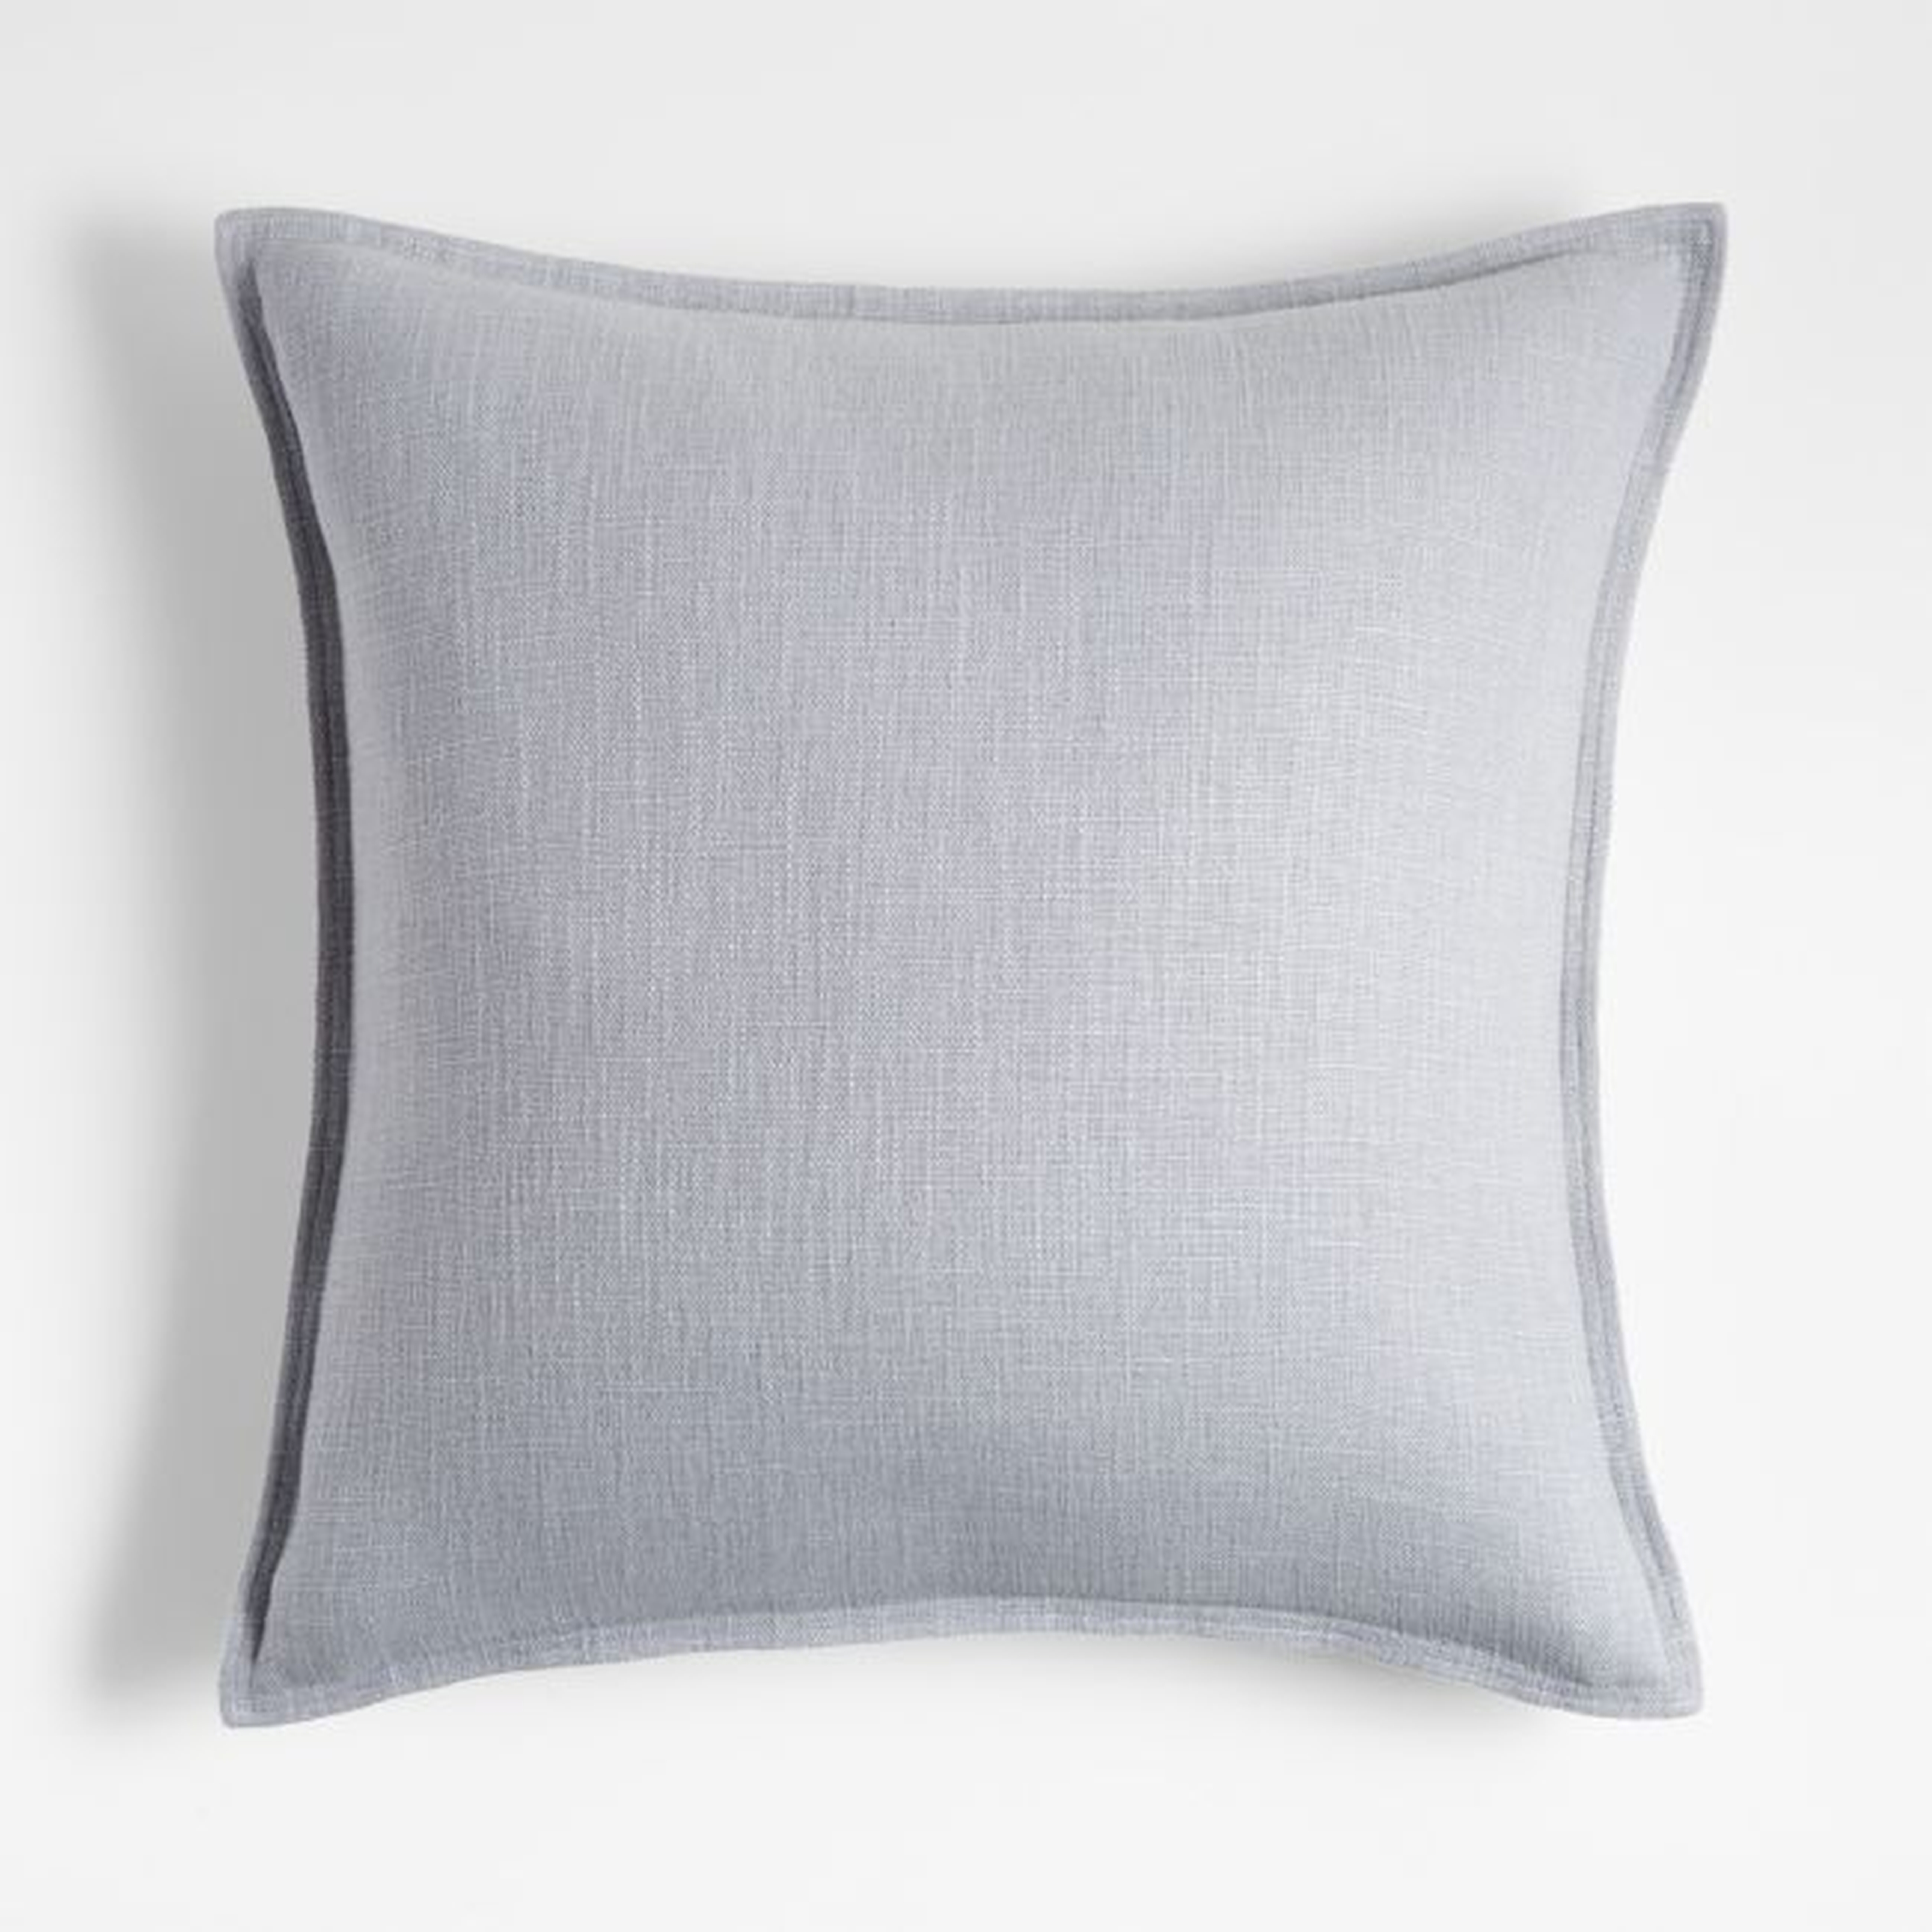 Quarry 20"x20" Laundered Linen Throw Pillow with Feather Insert - Crate and Barrel